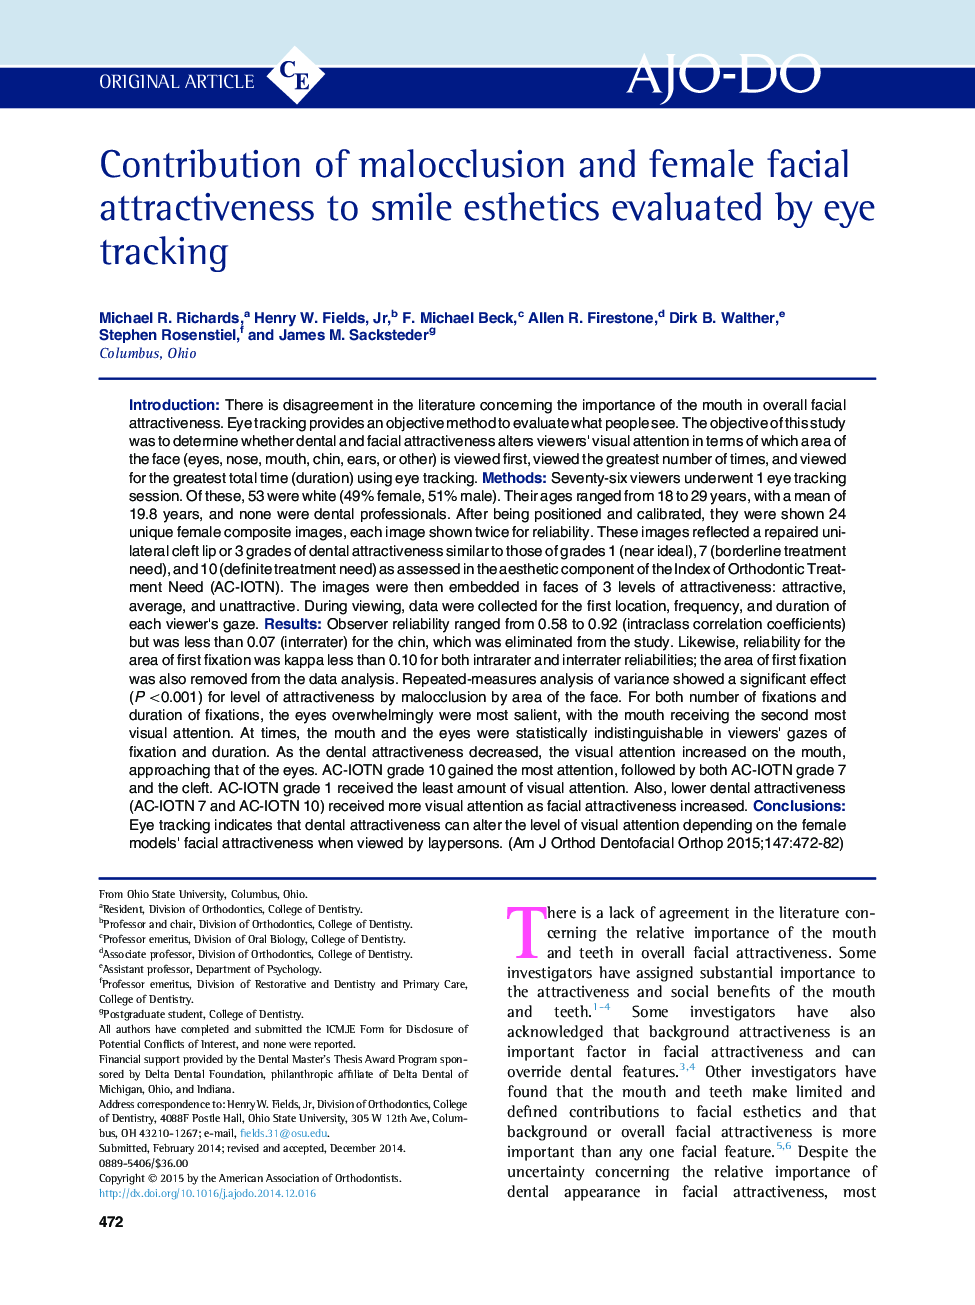 Contribution of malocclusion and female facial attractiveness to smile esthetics evaluated by eye tracking 